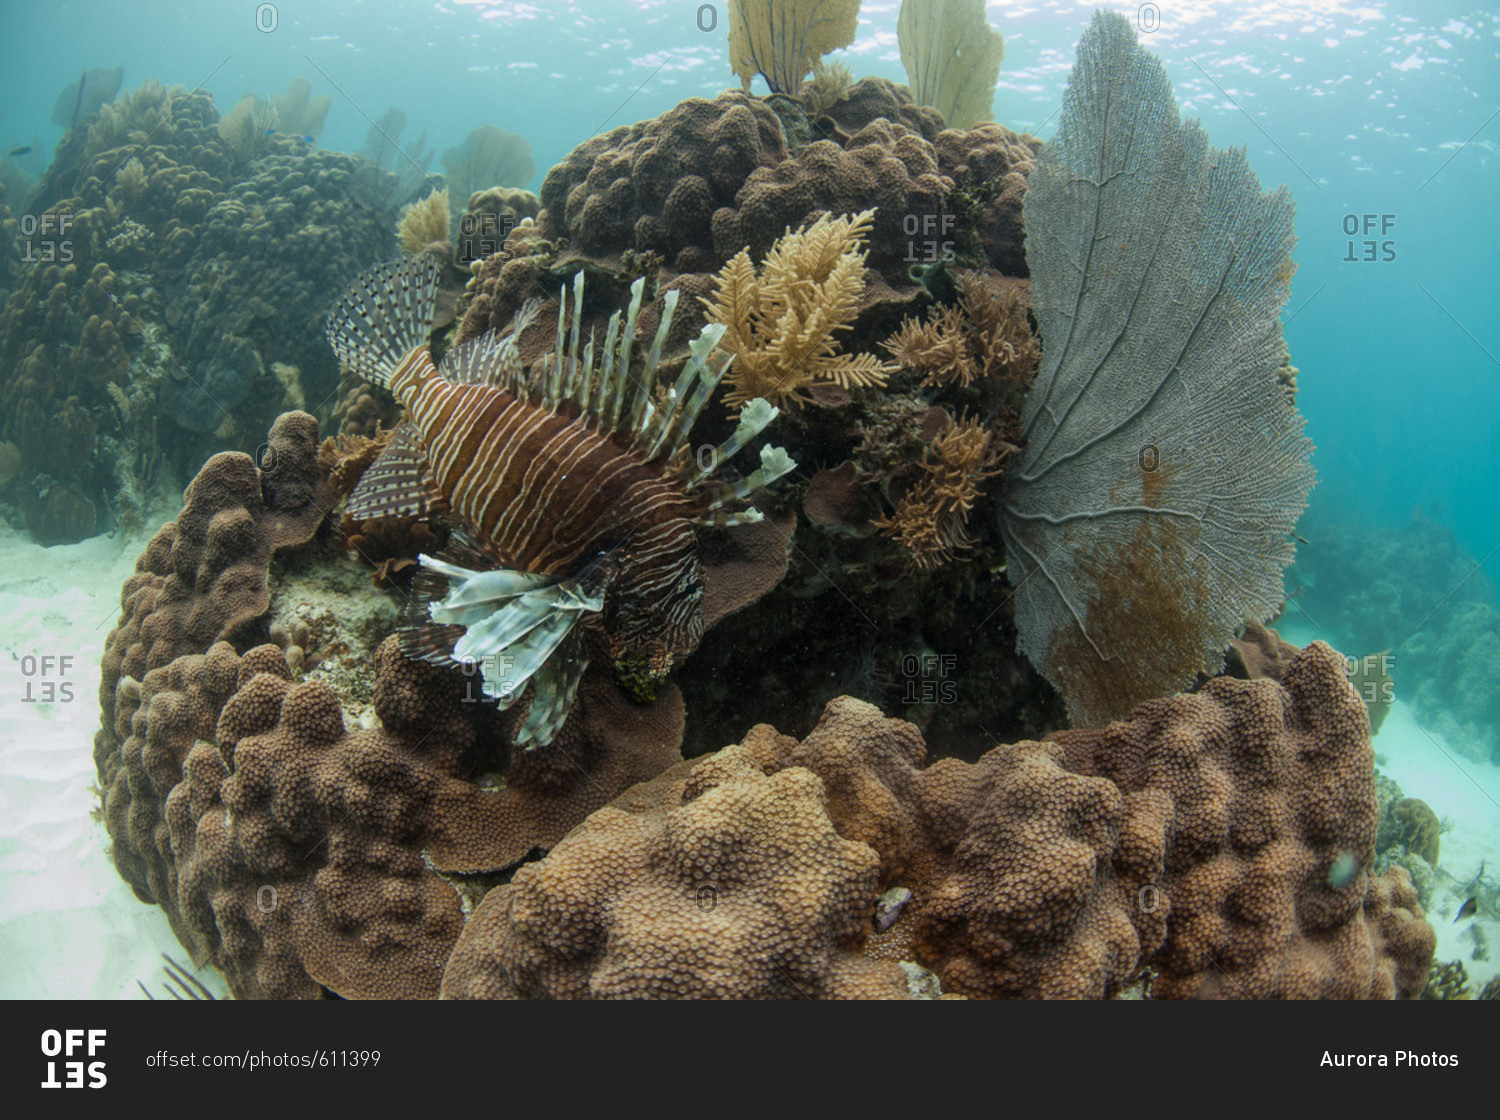 A lion fish hovers near coral in the ocean off of Pompano Kay Belize. The lion fish is an invasive species from the Pacific - in the Atlantic ocean it has no natural predators.